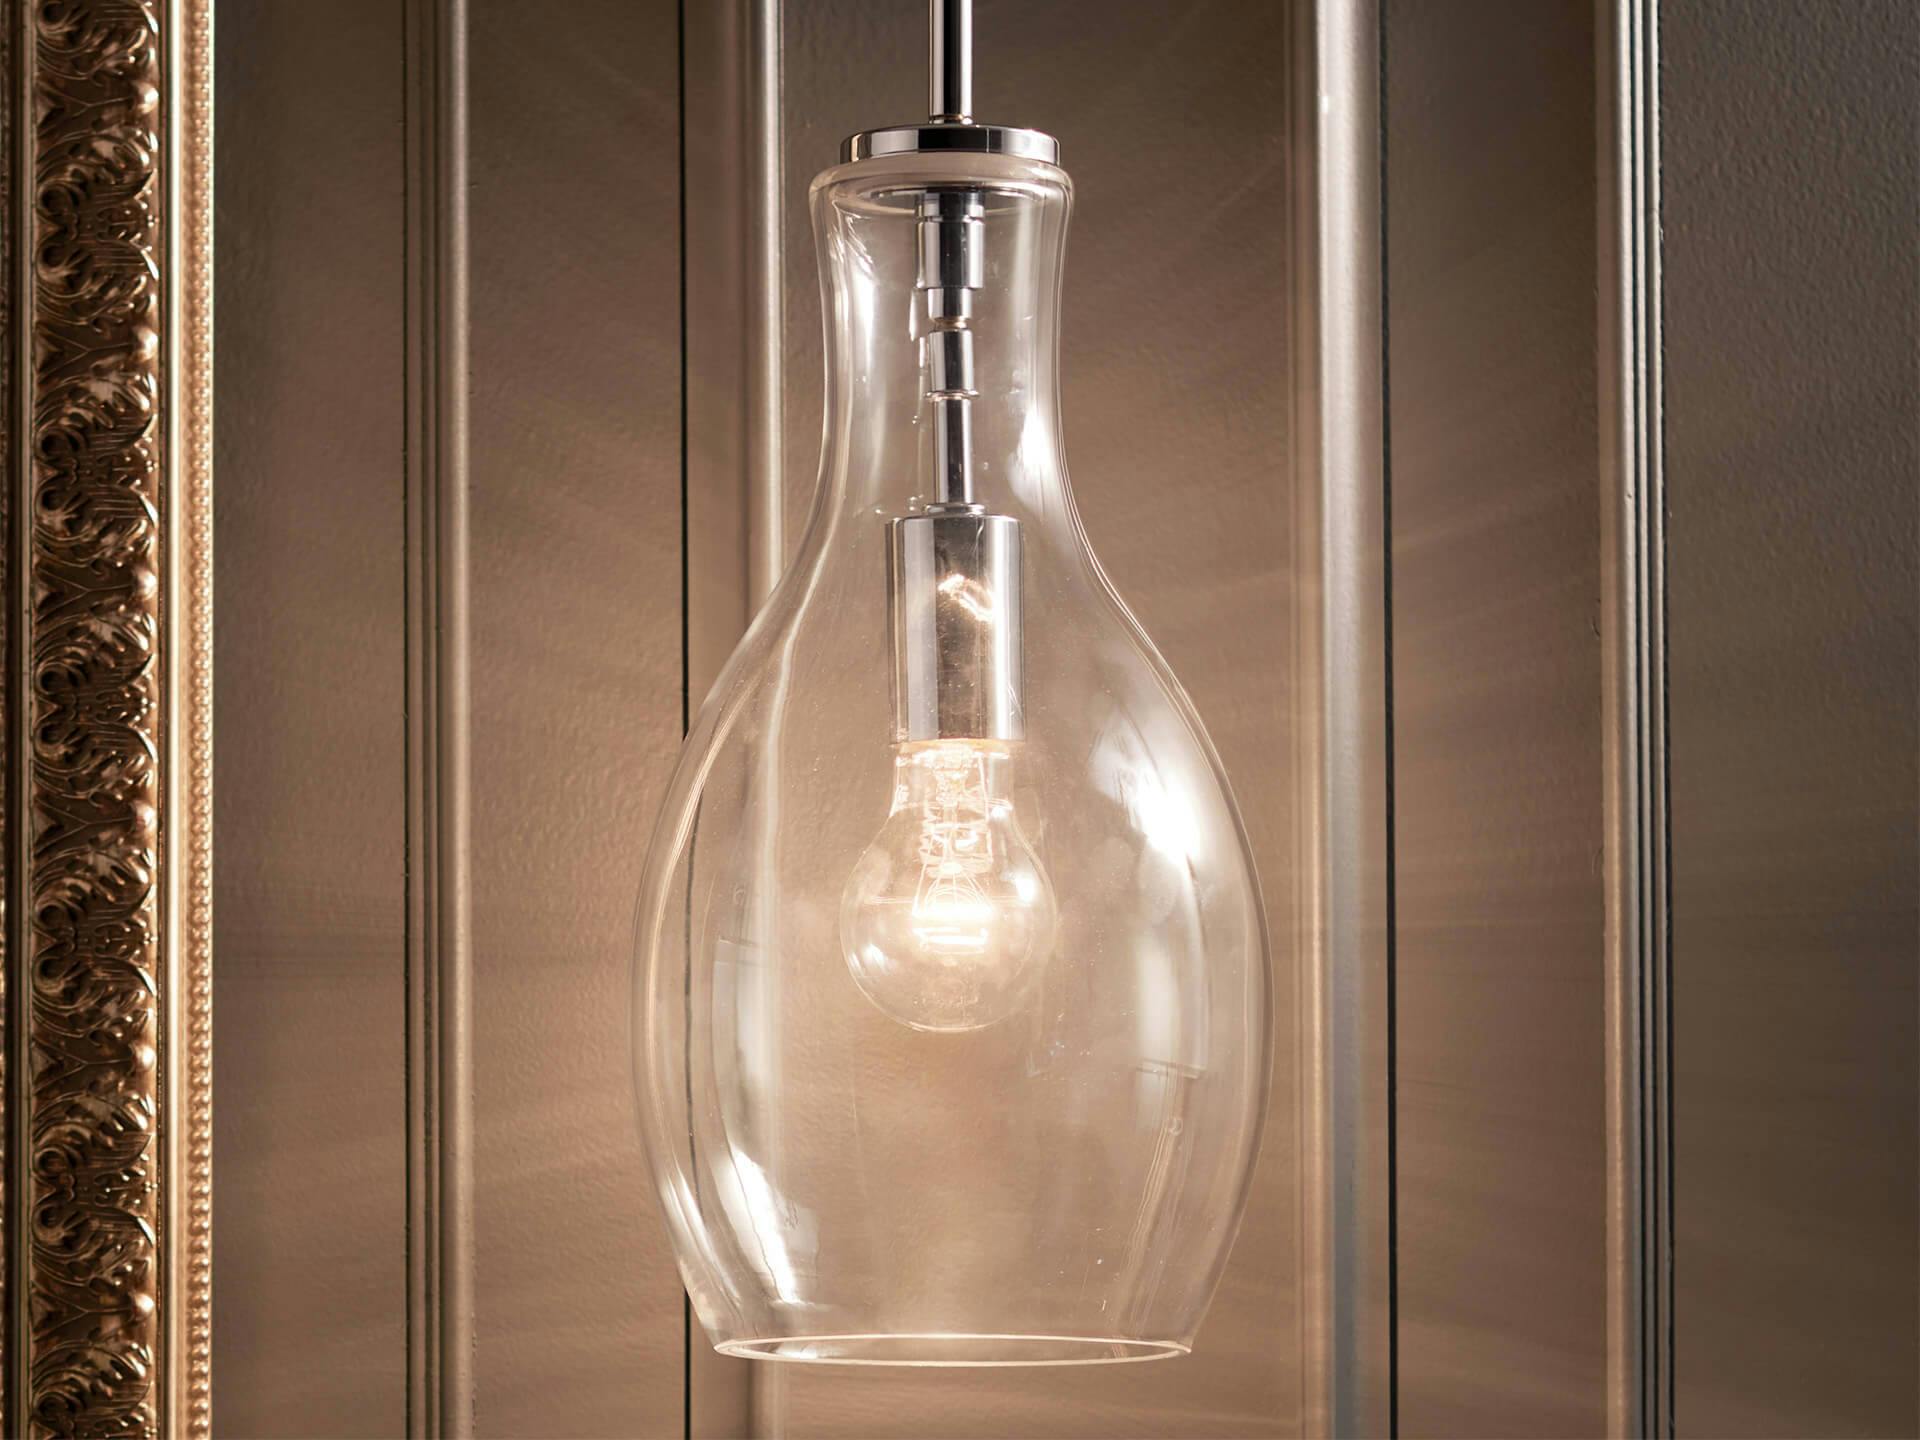 Example of a glass pendant light with dirty glass